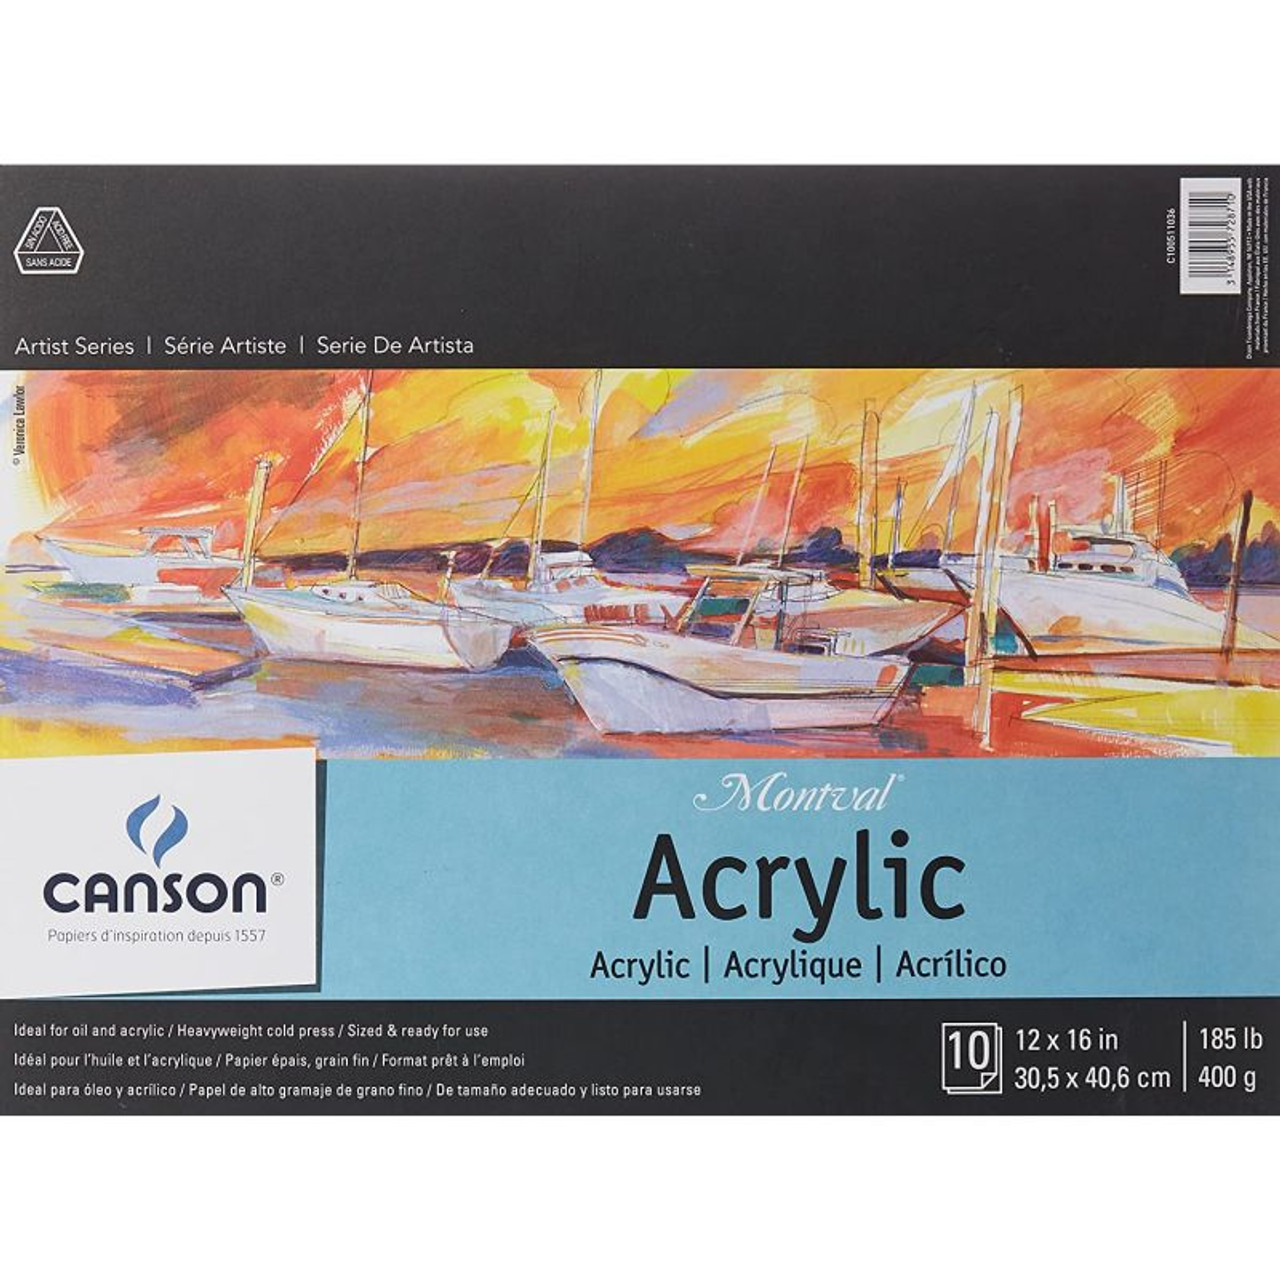 Canson Xl Series Watercolor Textured Paper Pad For Paint, Pencil, Ink,  Charcoal